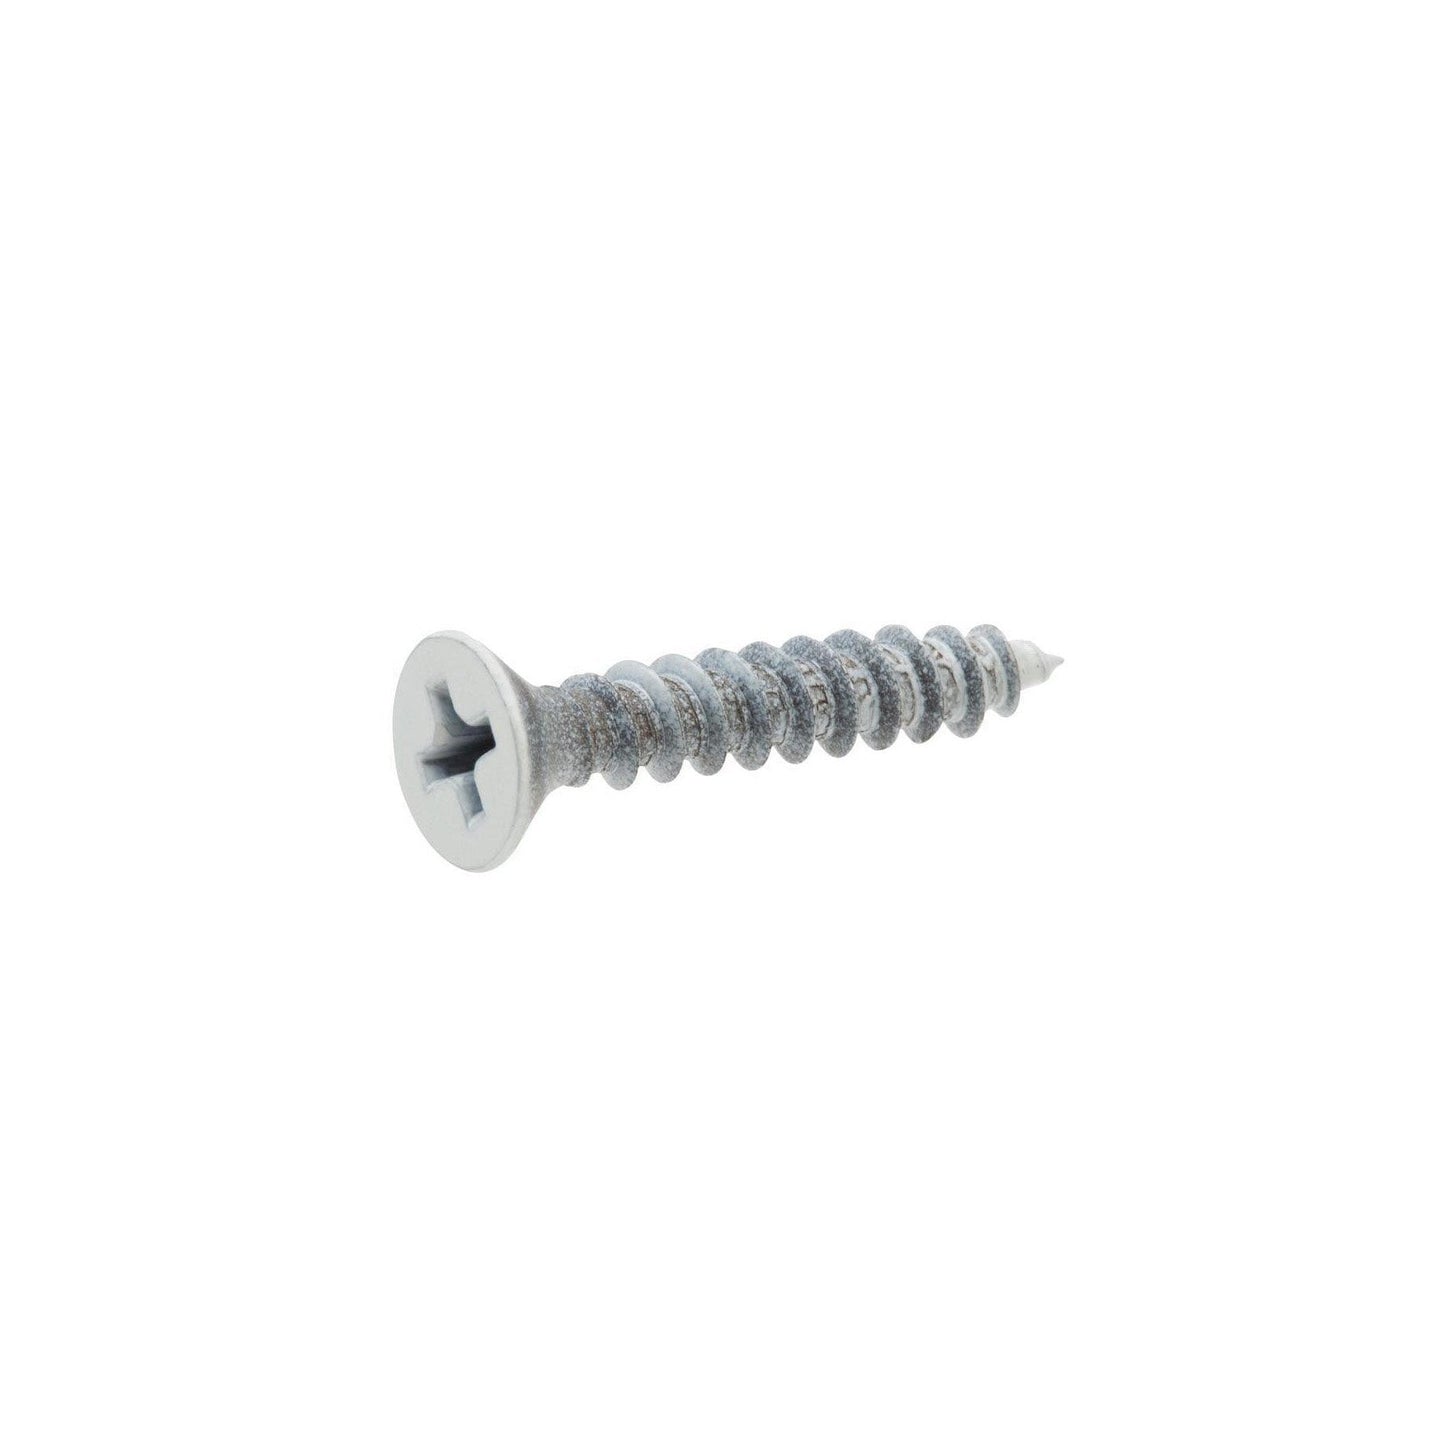 8 x 1'' Pozi c/sk Twinthread Wood Screws 0072 (Large Letter Rate)